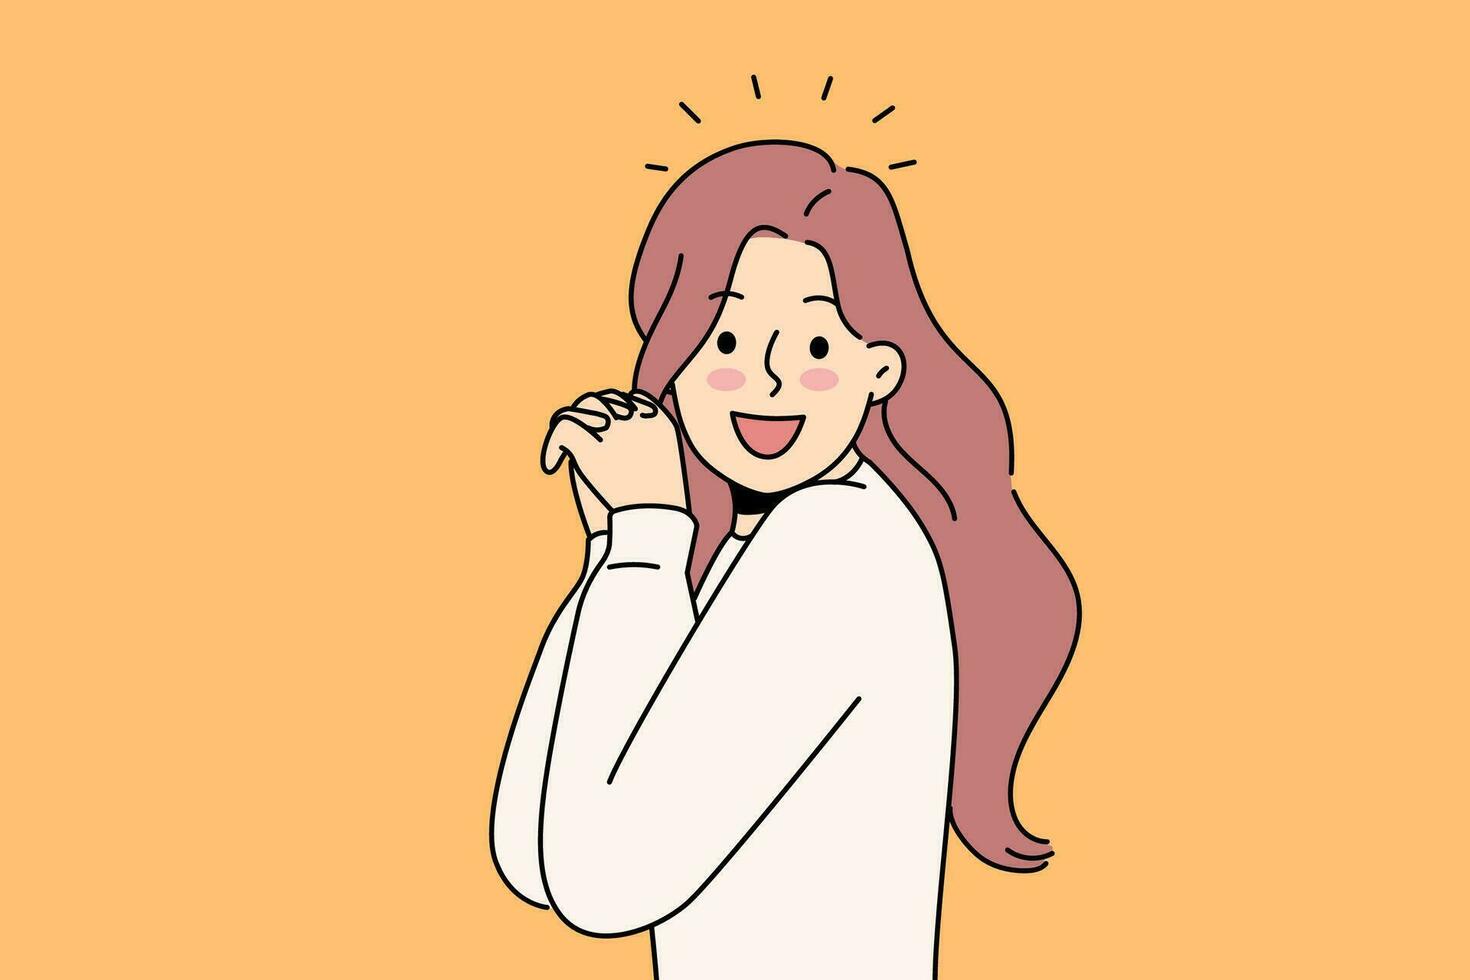 Laughing woman raises hands and looks at screen, enjoying meeting you or glad to receive good news. Laughing girl with long hair experiences delight and positive emotions after achieving goals vector